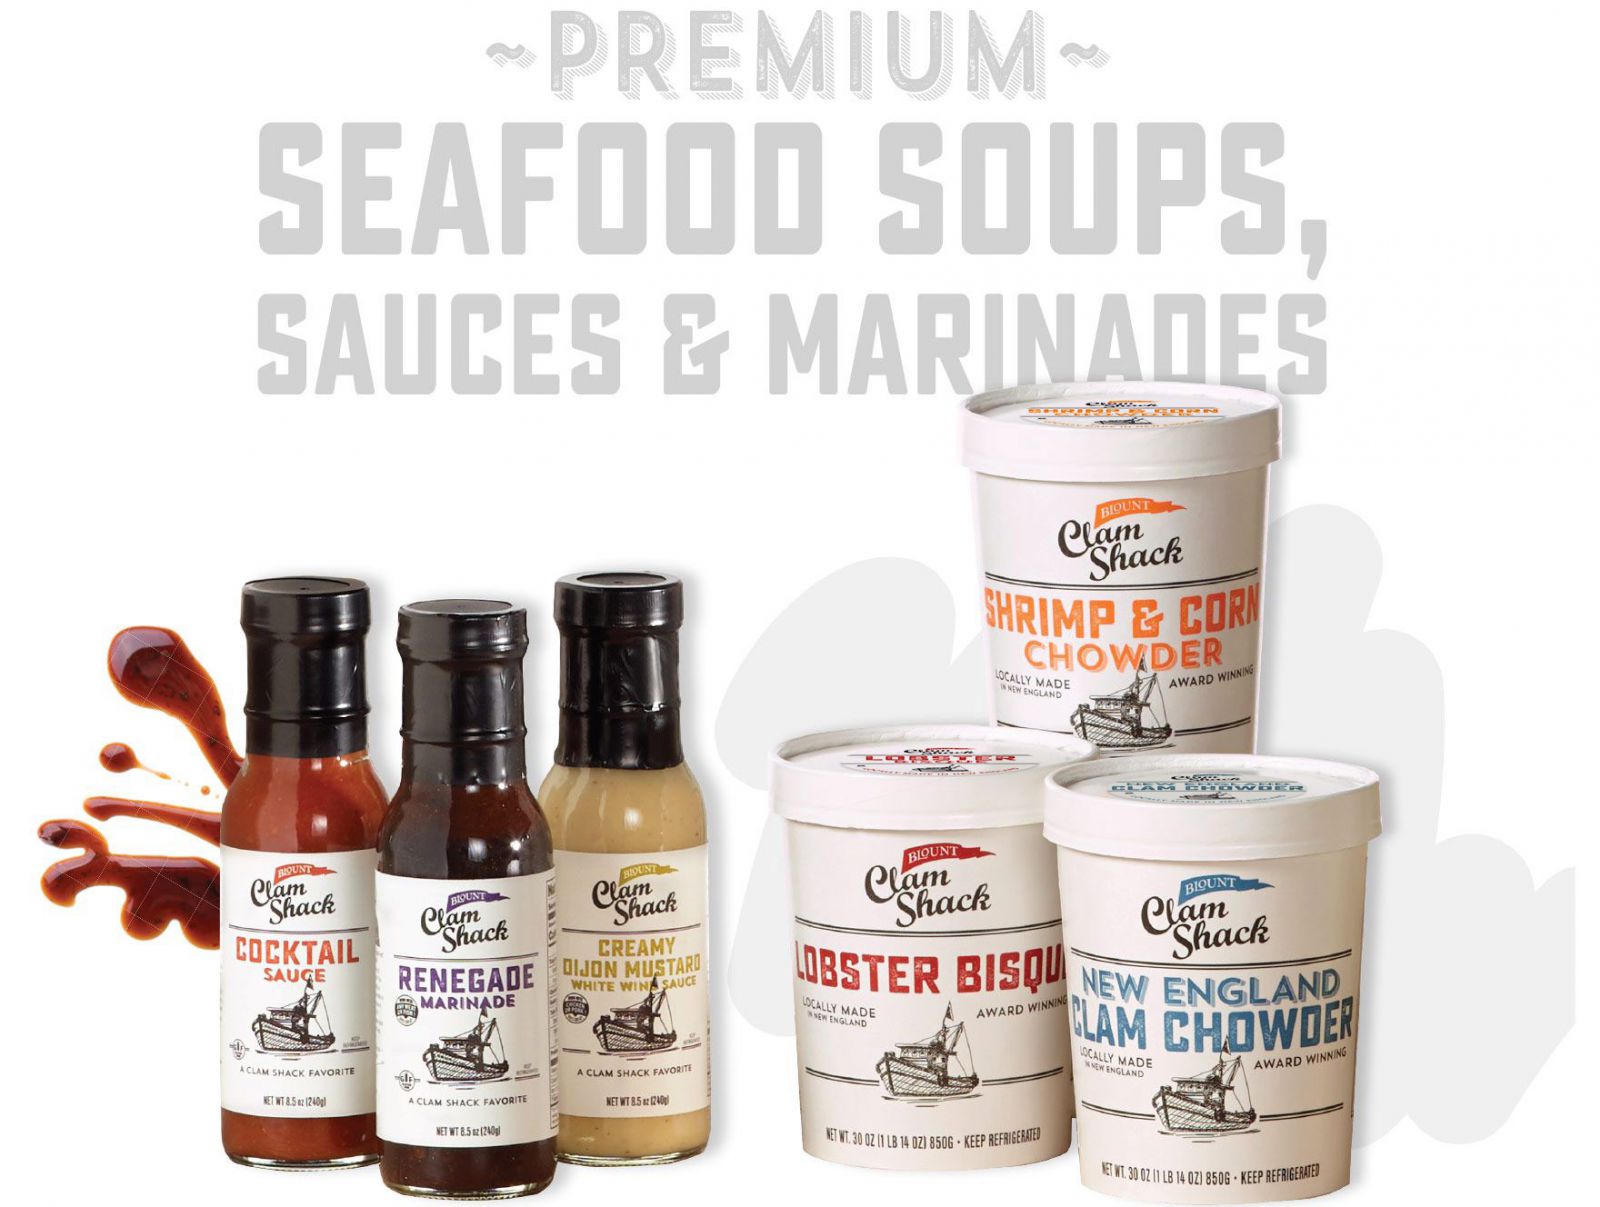 Clam Shack Soup containers and bottled dressing